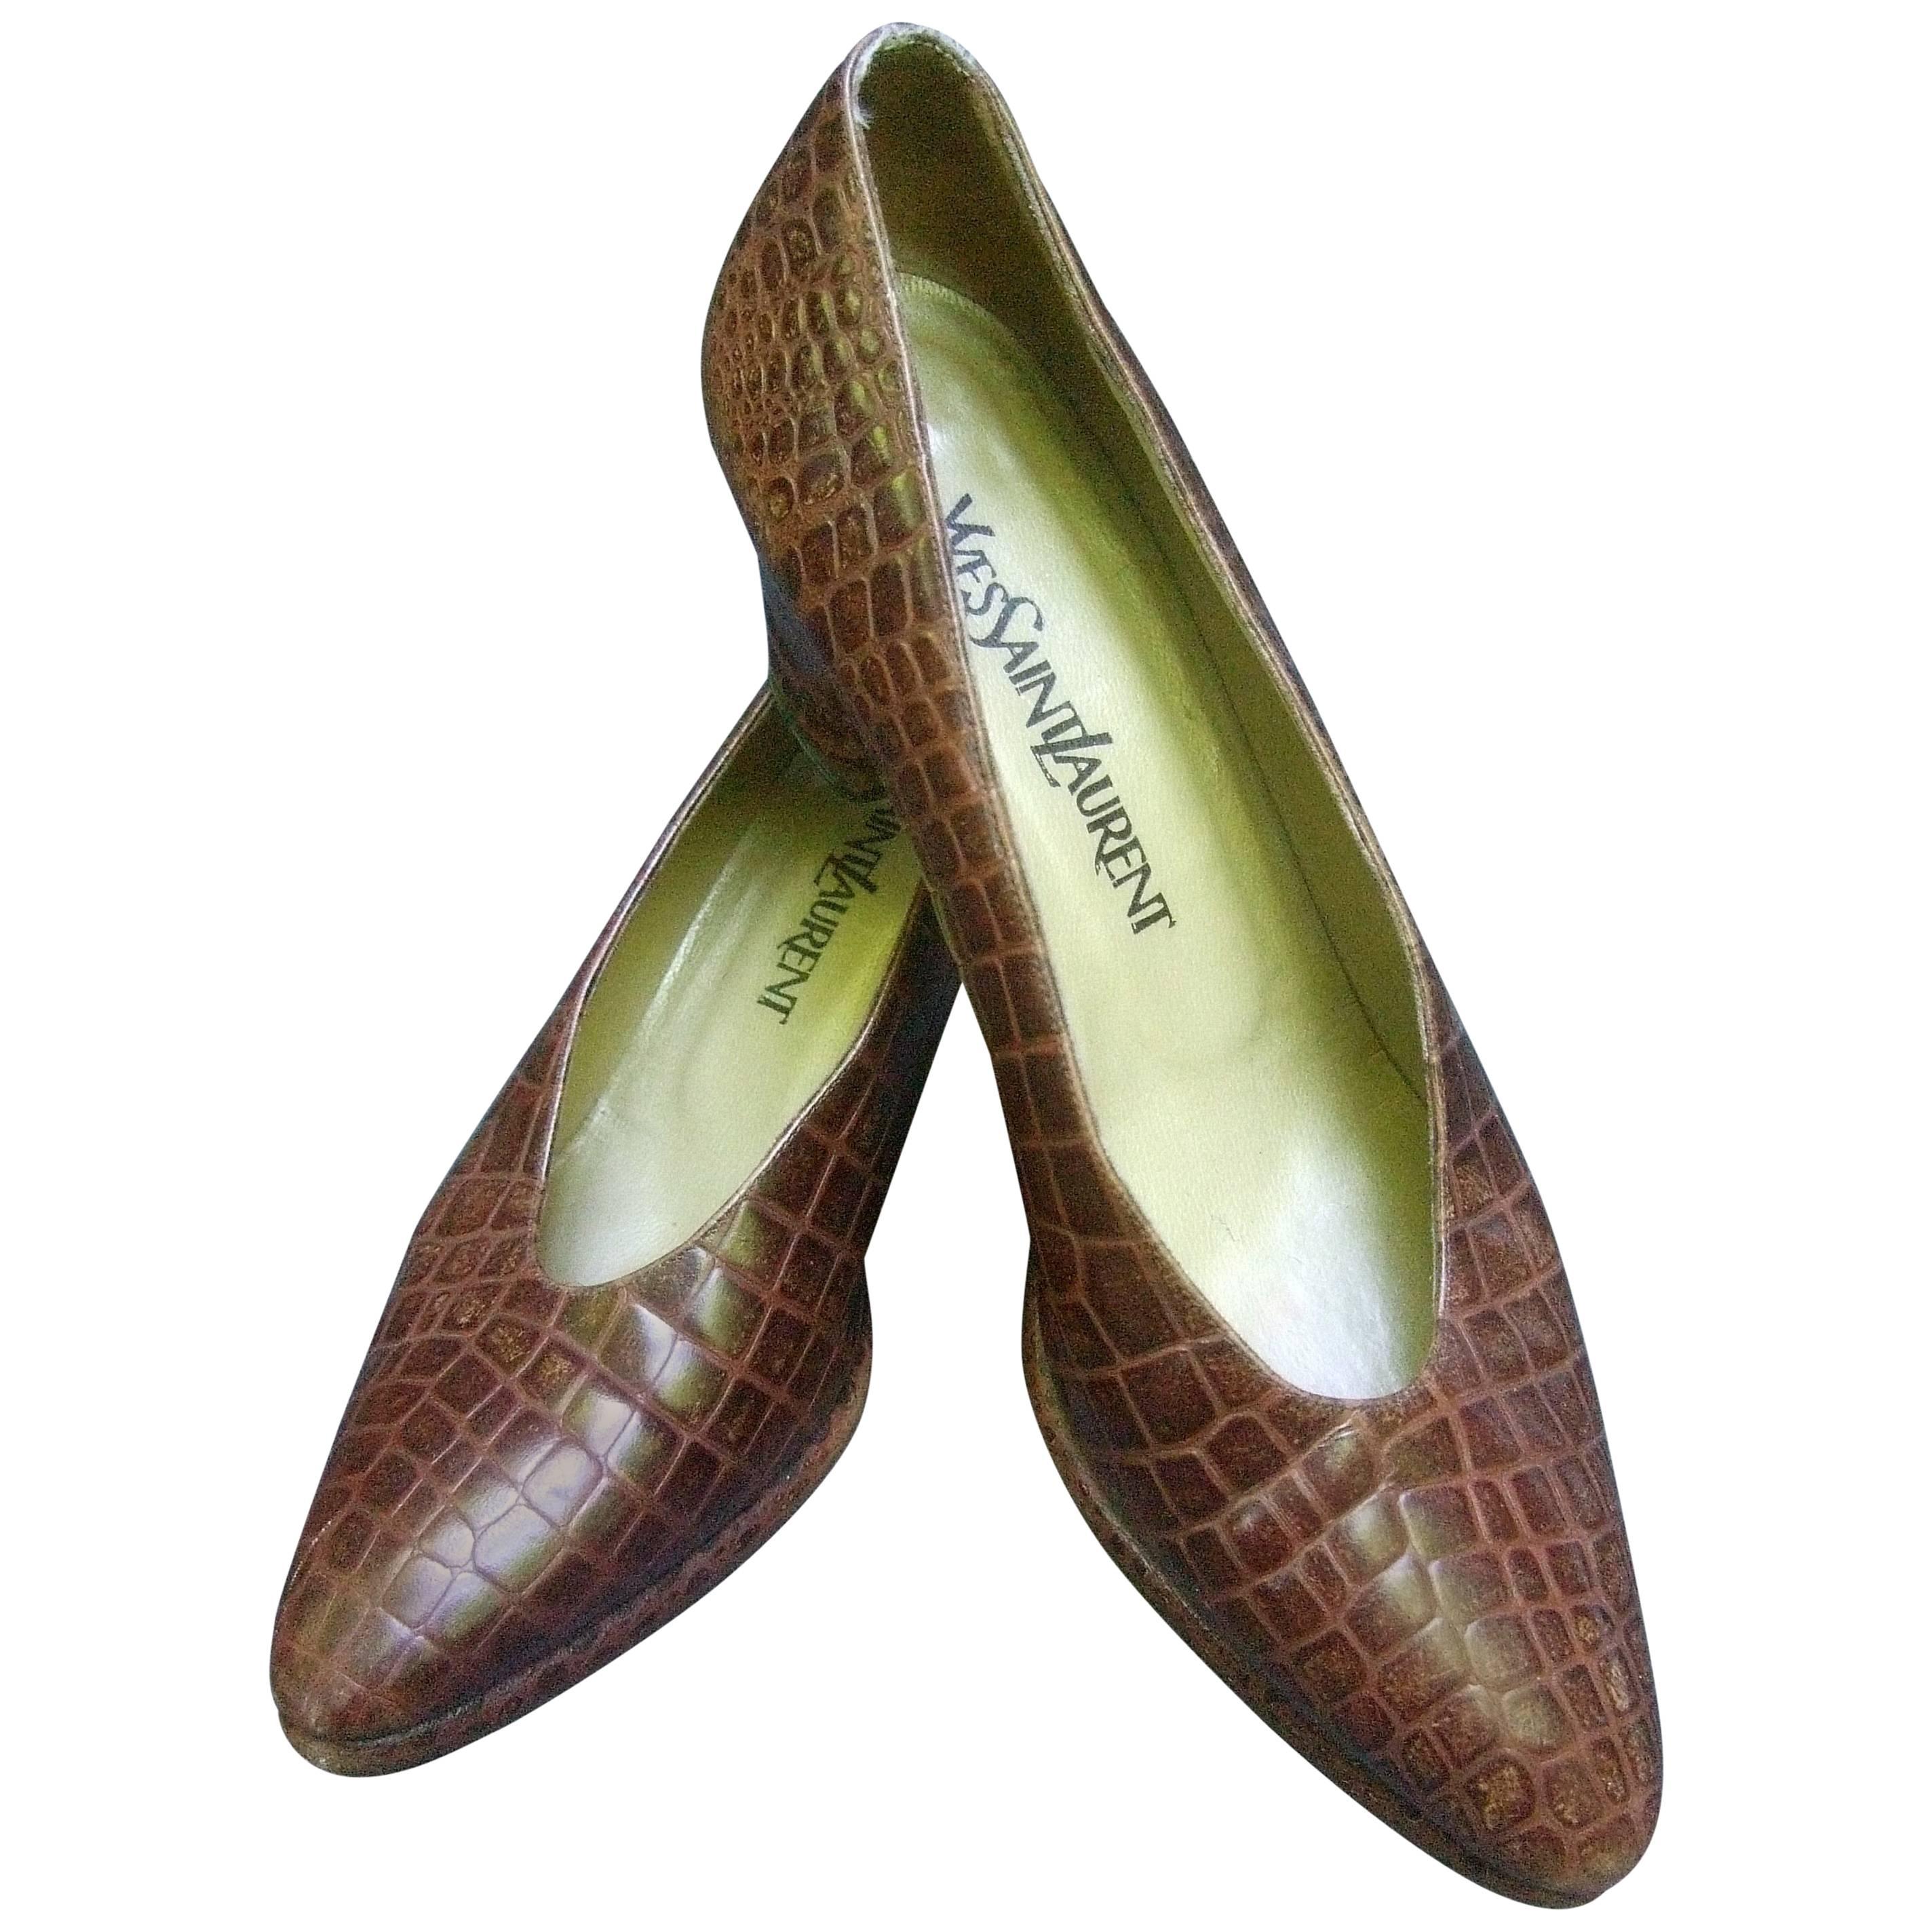 Yves Saint Laurent Italian Embossed Brown Leather Pumps US Size 7.5 M